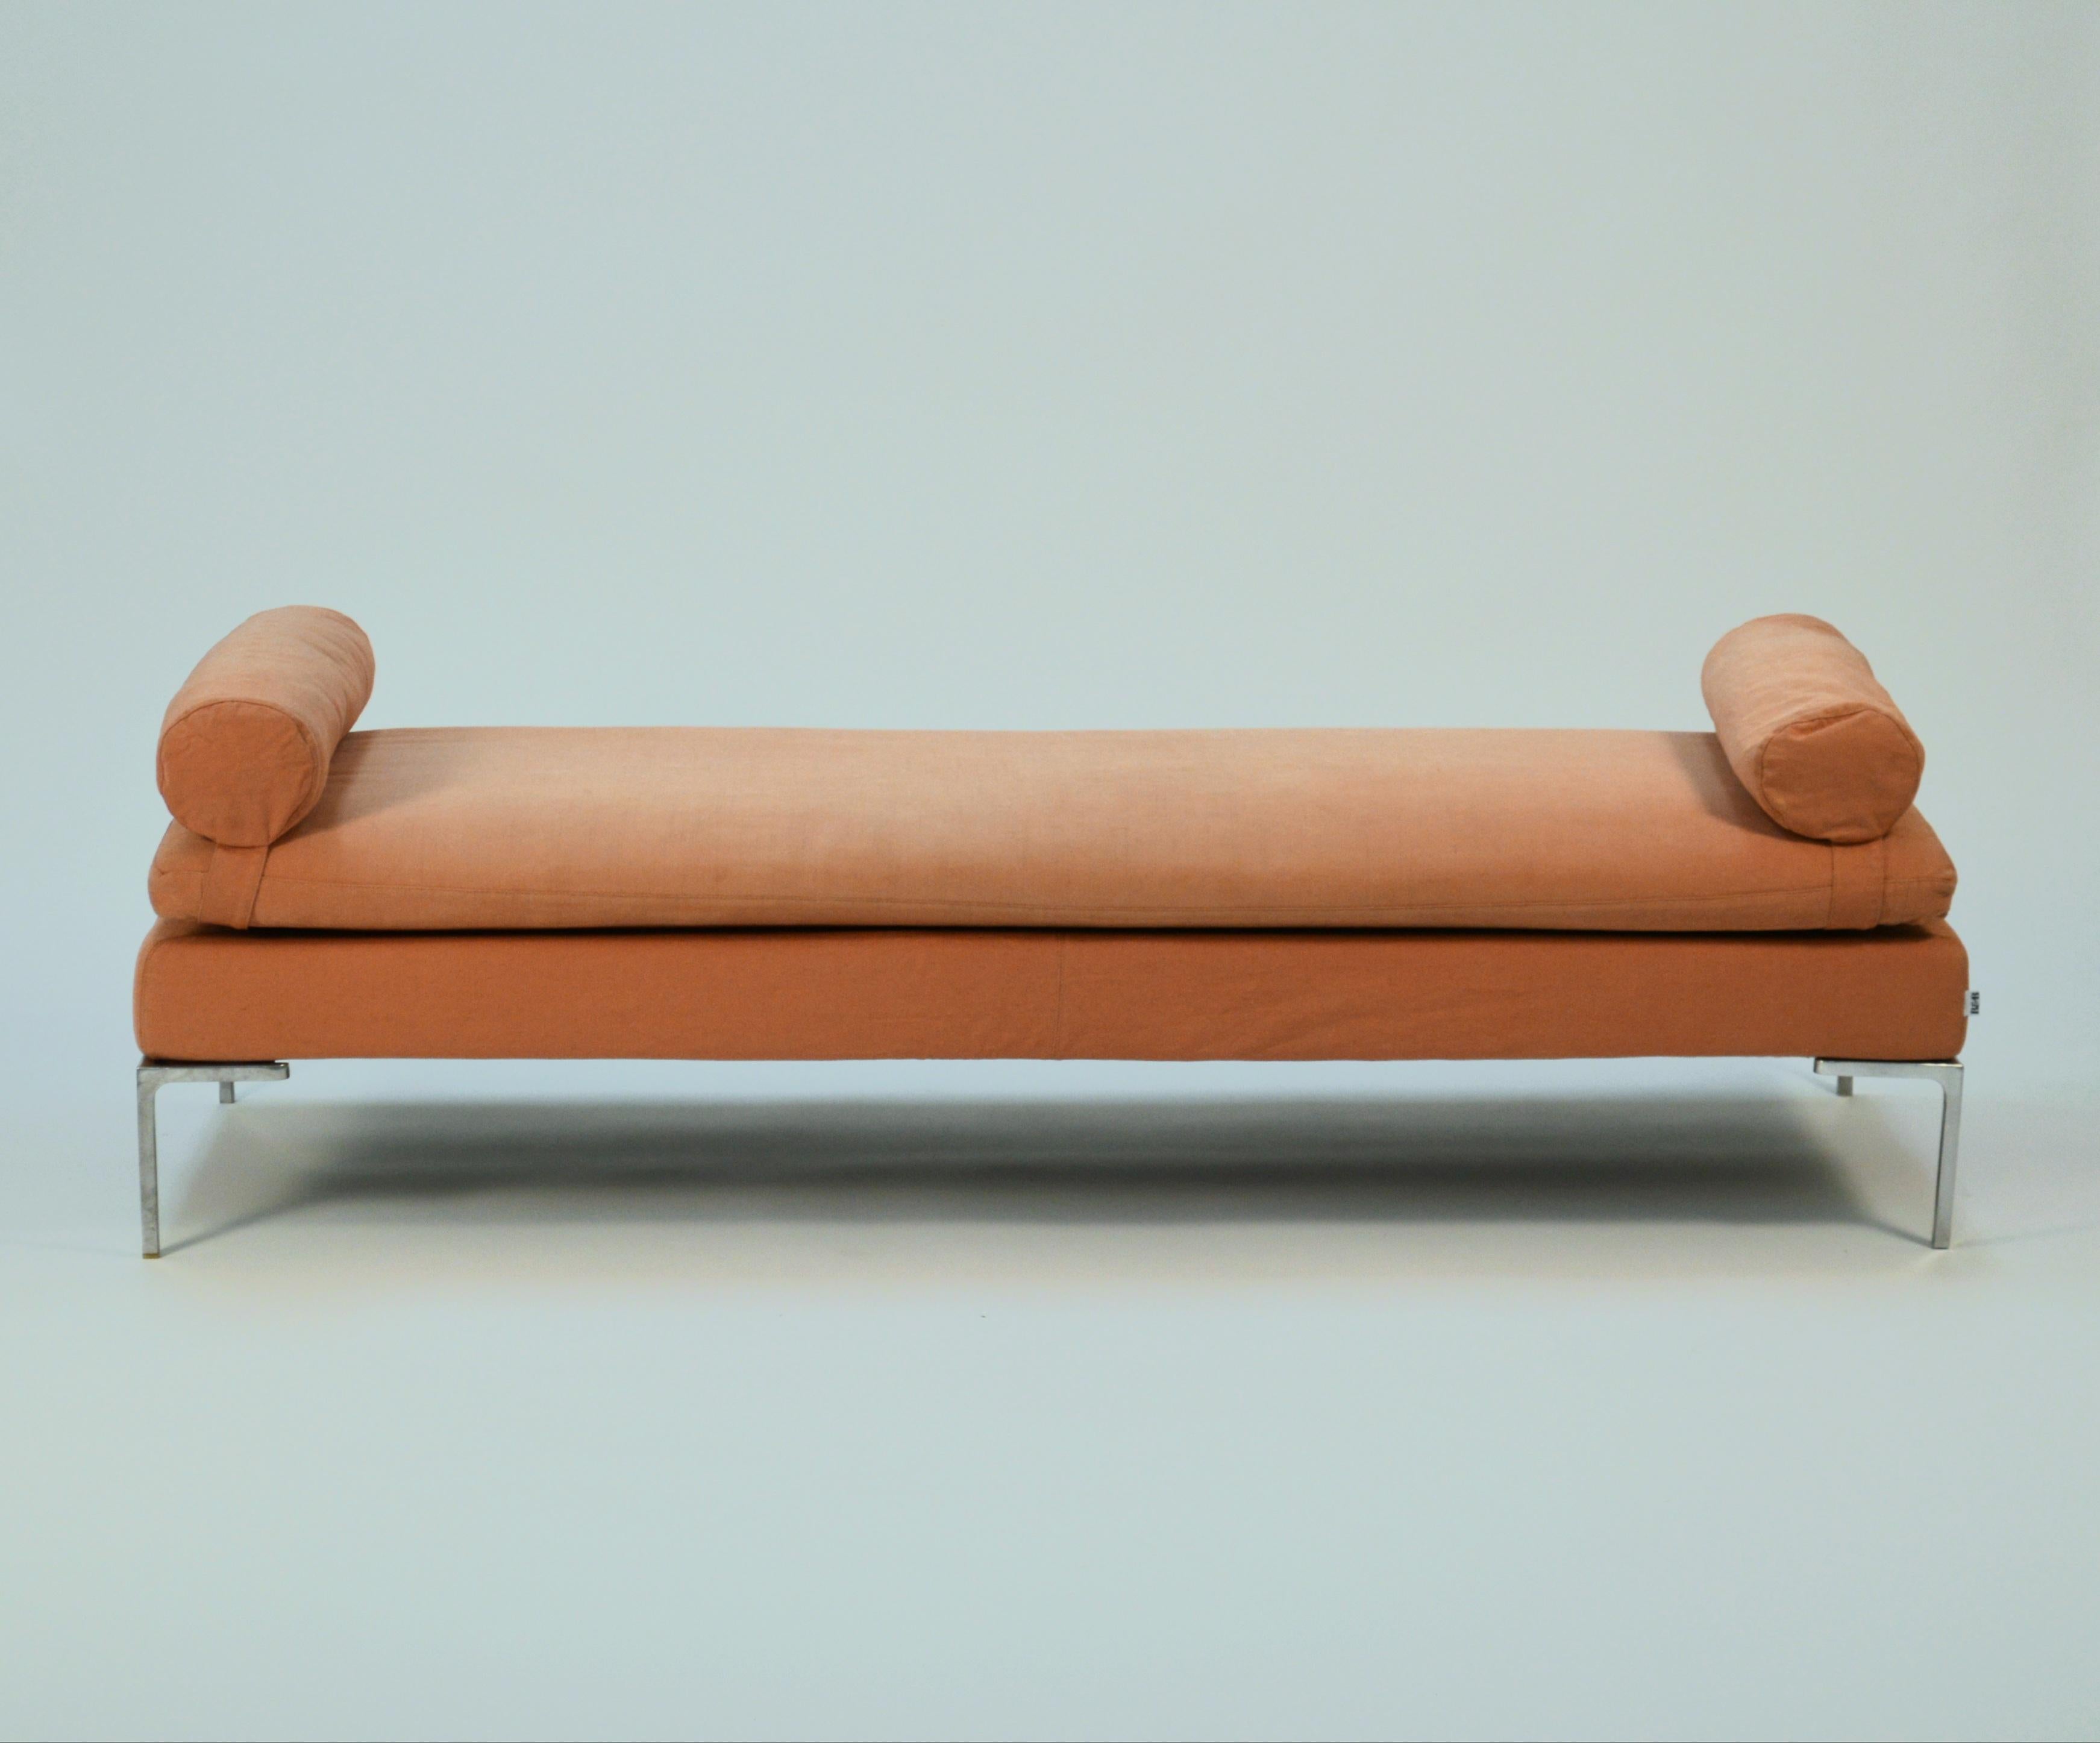 Antonio Citterio 'Charles' daybed sofa made by B&B Italia in 2000. Sofa is upholstered in its original light red-orange colored polyester/cotton blend upholstery. The piece has some UV fading due to age and has a beautiful soft hue closest to